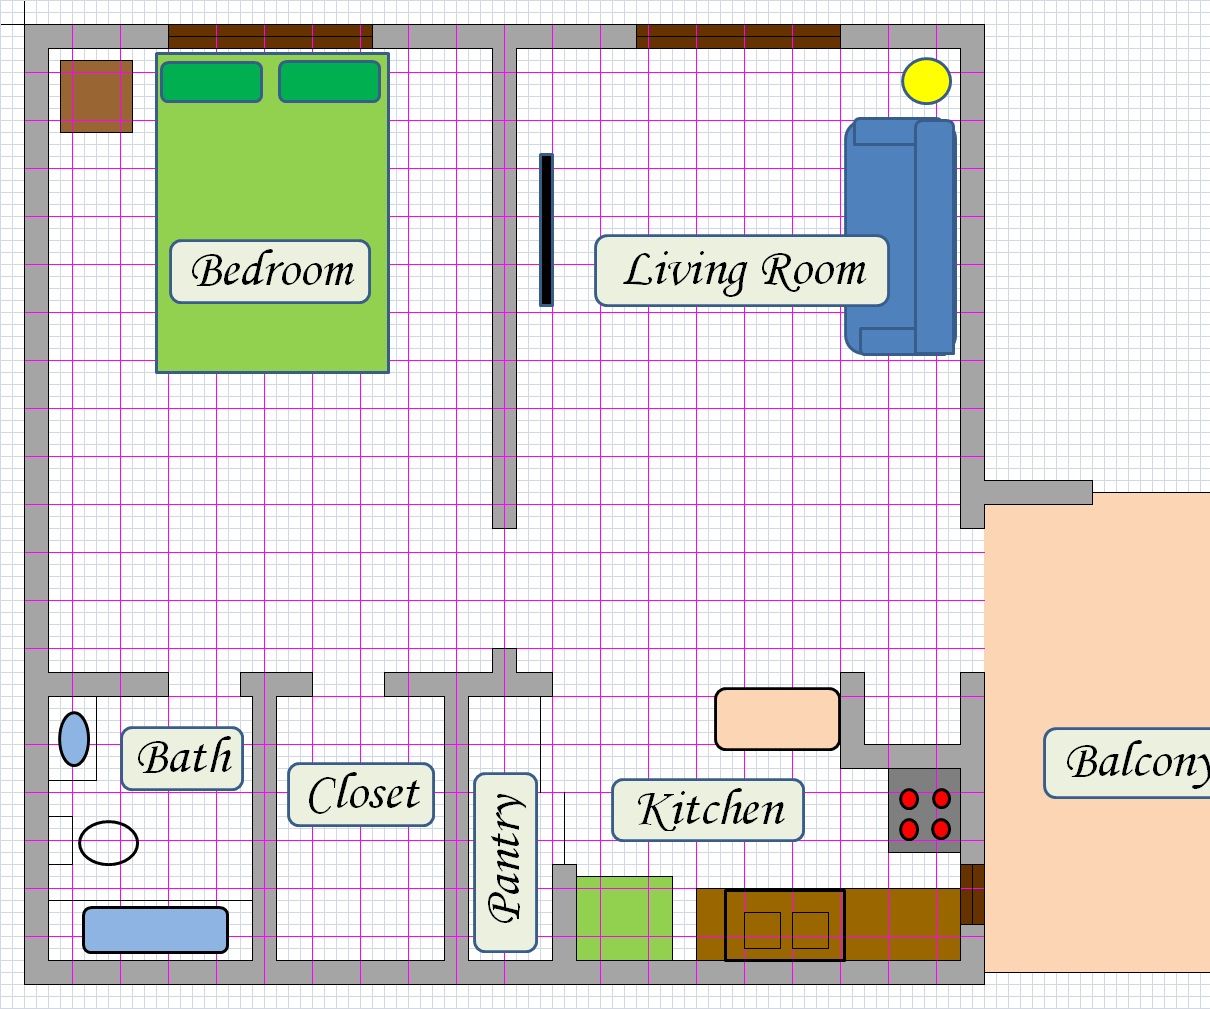 Create Floor Plan Using MS Excel 5 Steps (with Pictures